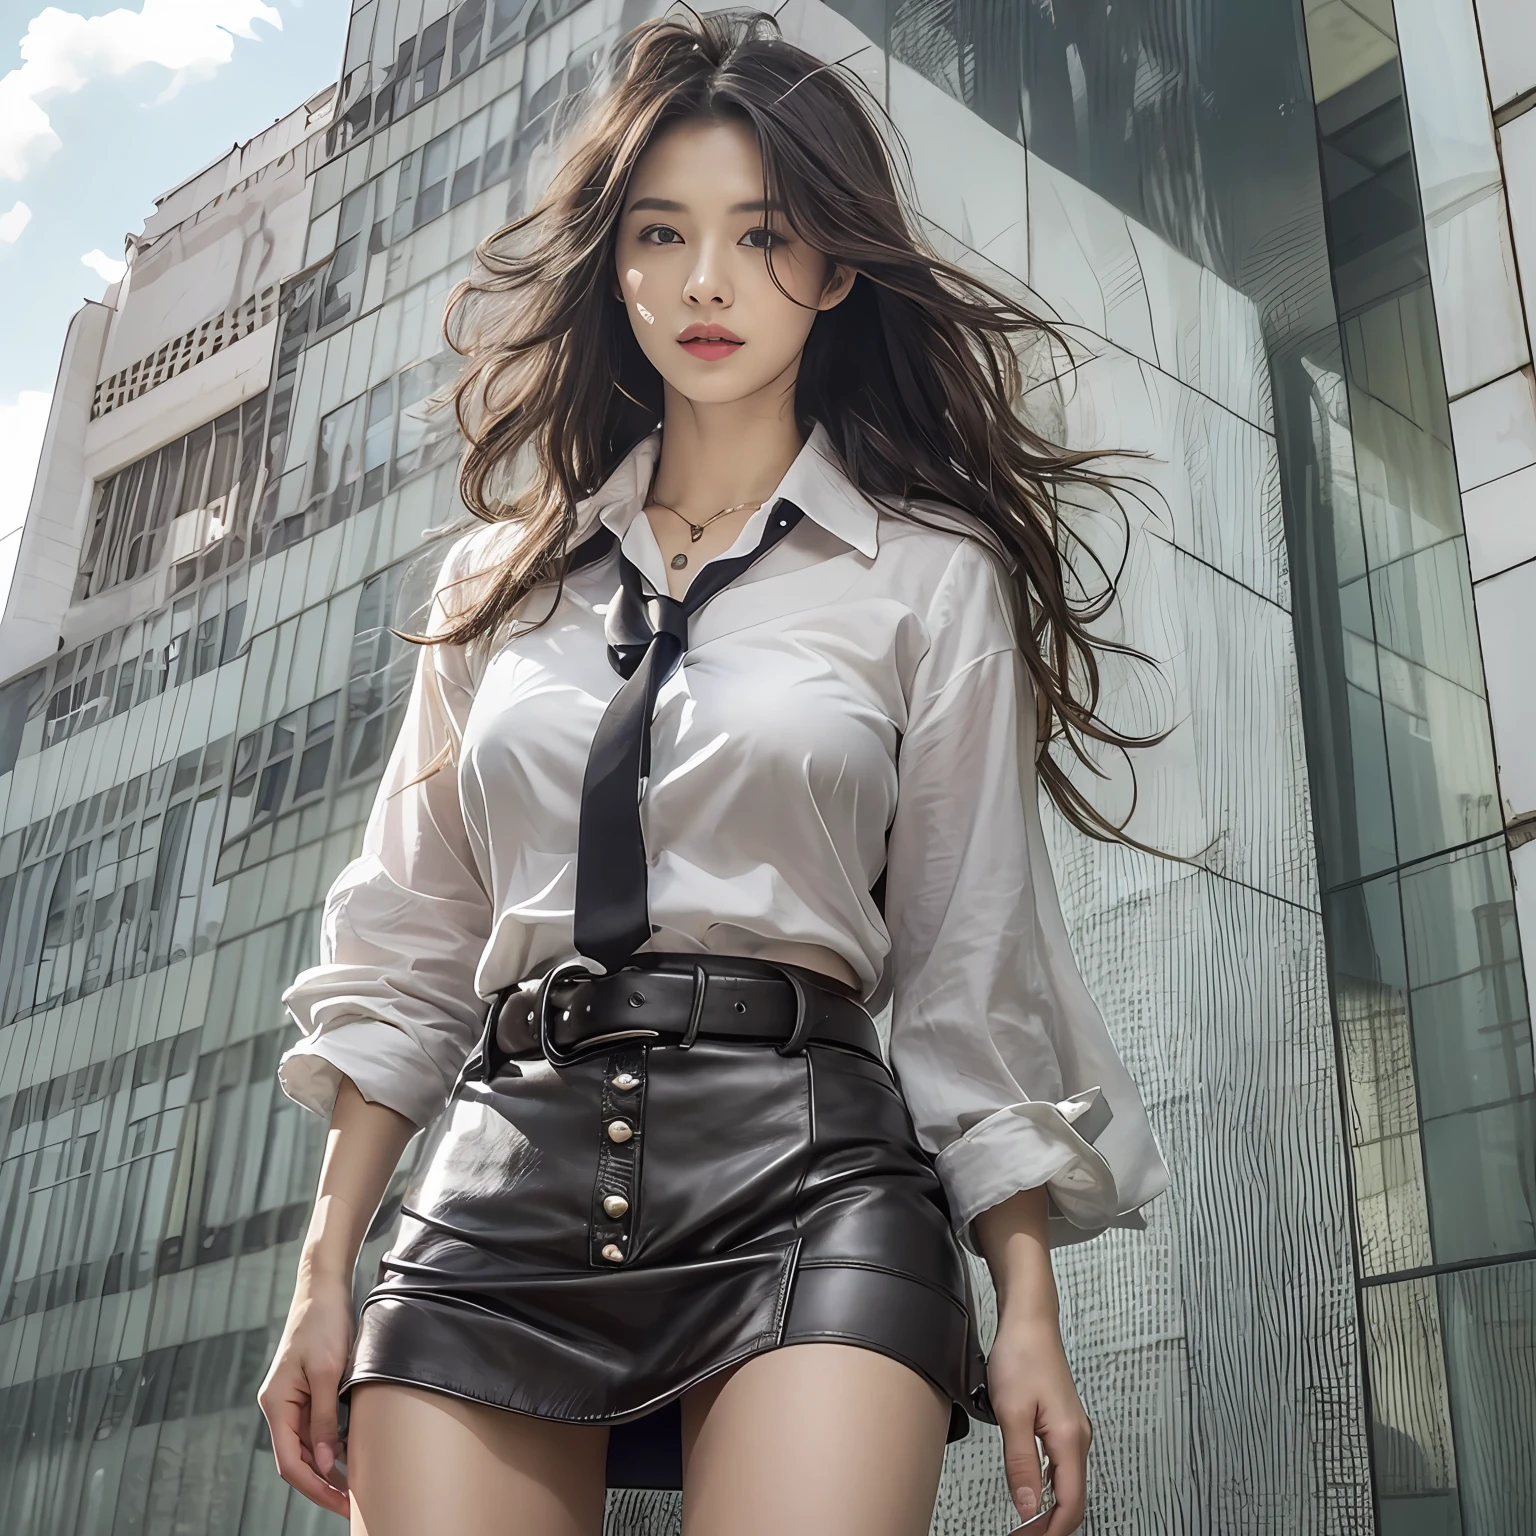 (top-quality、hight resolution、​masterpiece:1.3)、Tall and cute woman、Slender Abs、Dark brown hair styled in loose waves、breastsout、Wearing a pendant、White button-up shirt、a belt、Black leather tight skirt、(Modern architecture in background)、Details exquisitely rendered in the face and skin texture、A detailed eye、double eyelid